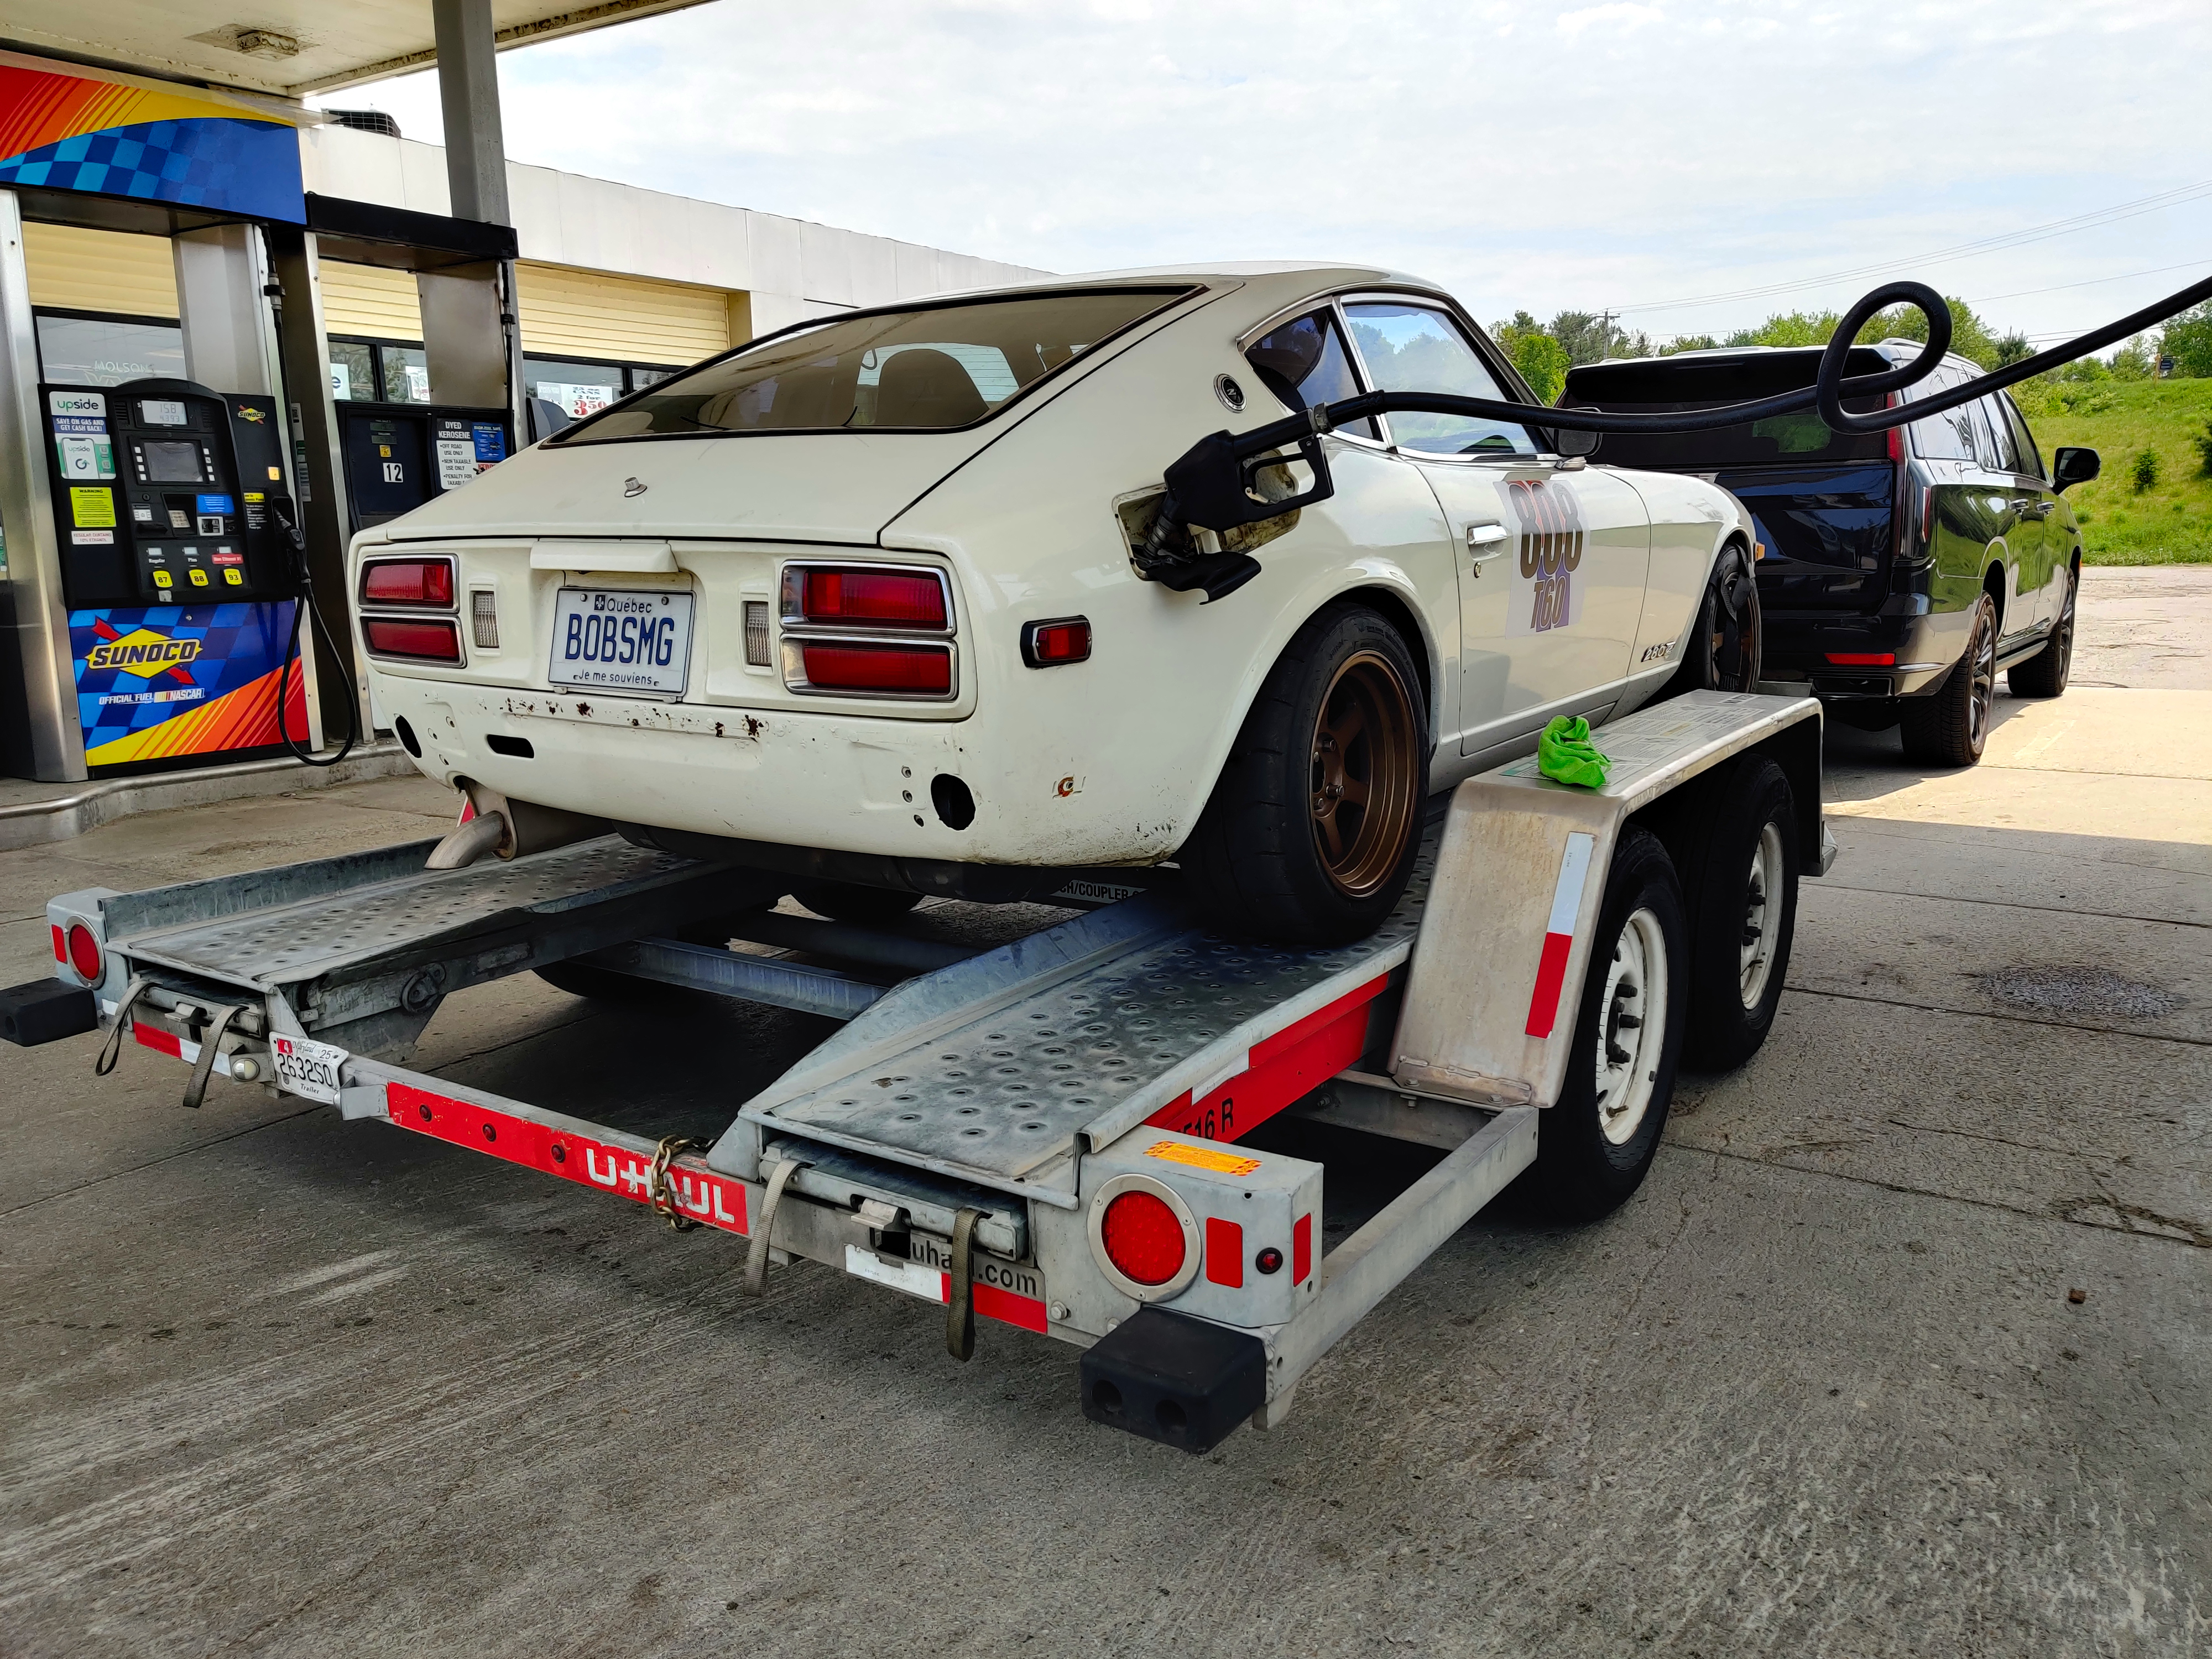 A 1978 Datsun 280Z sits on a trailer in a gas station receiving gas from a pump hose